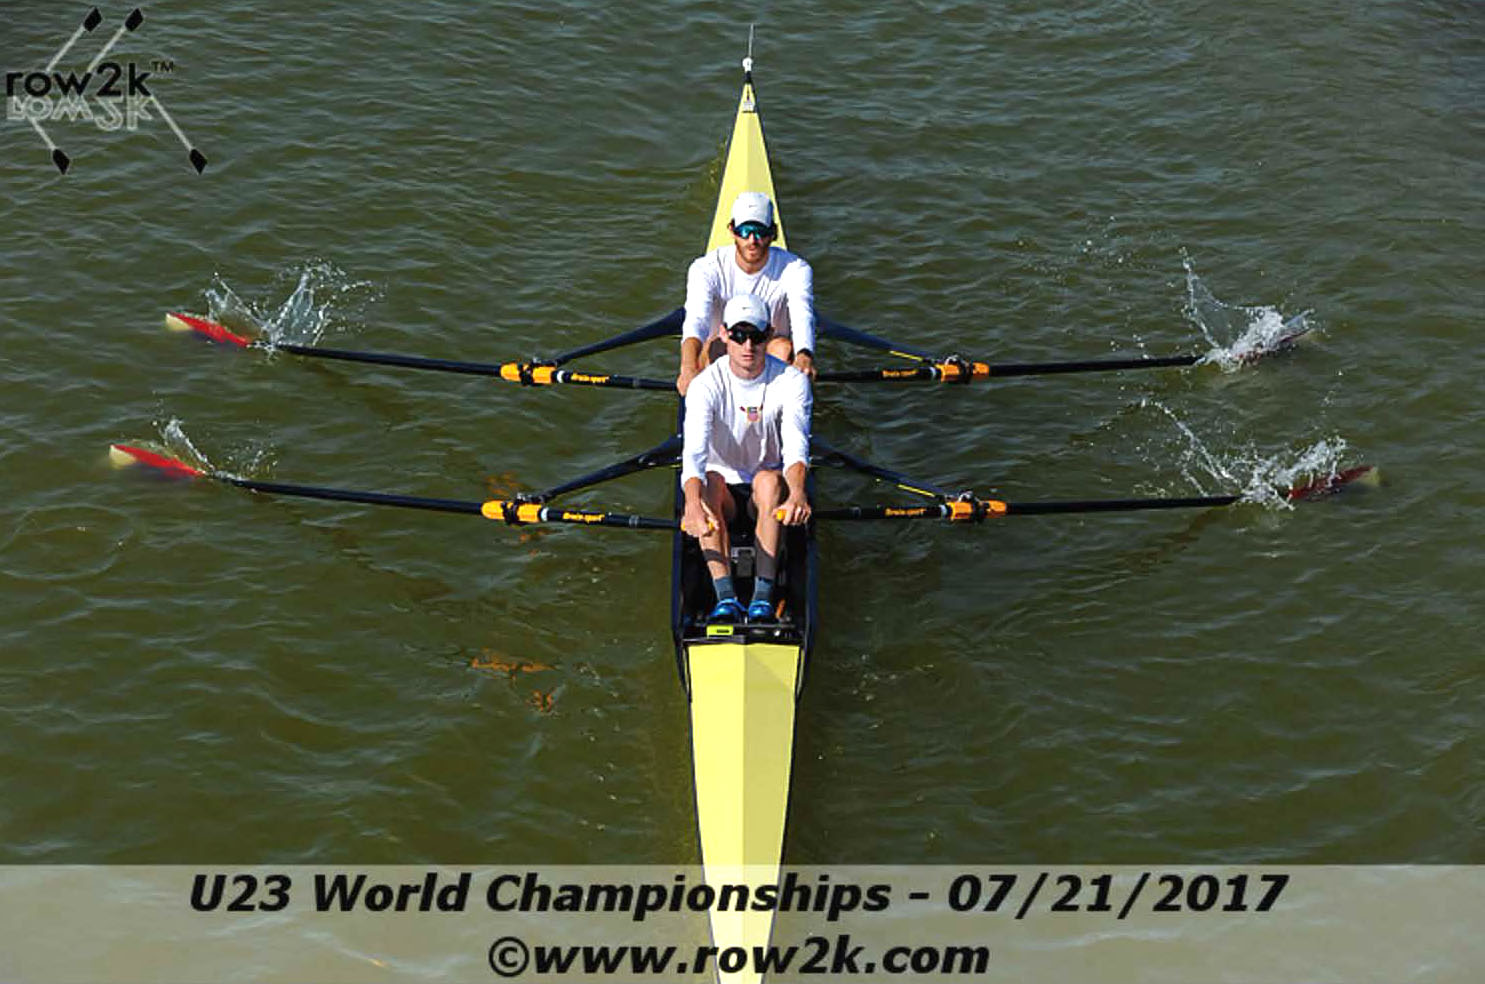 Rowing captains Galen Bernick and Danny Madden race in the Under 23 Rowing Championship in July.